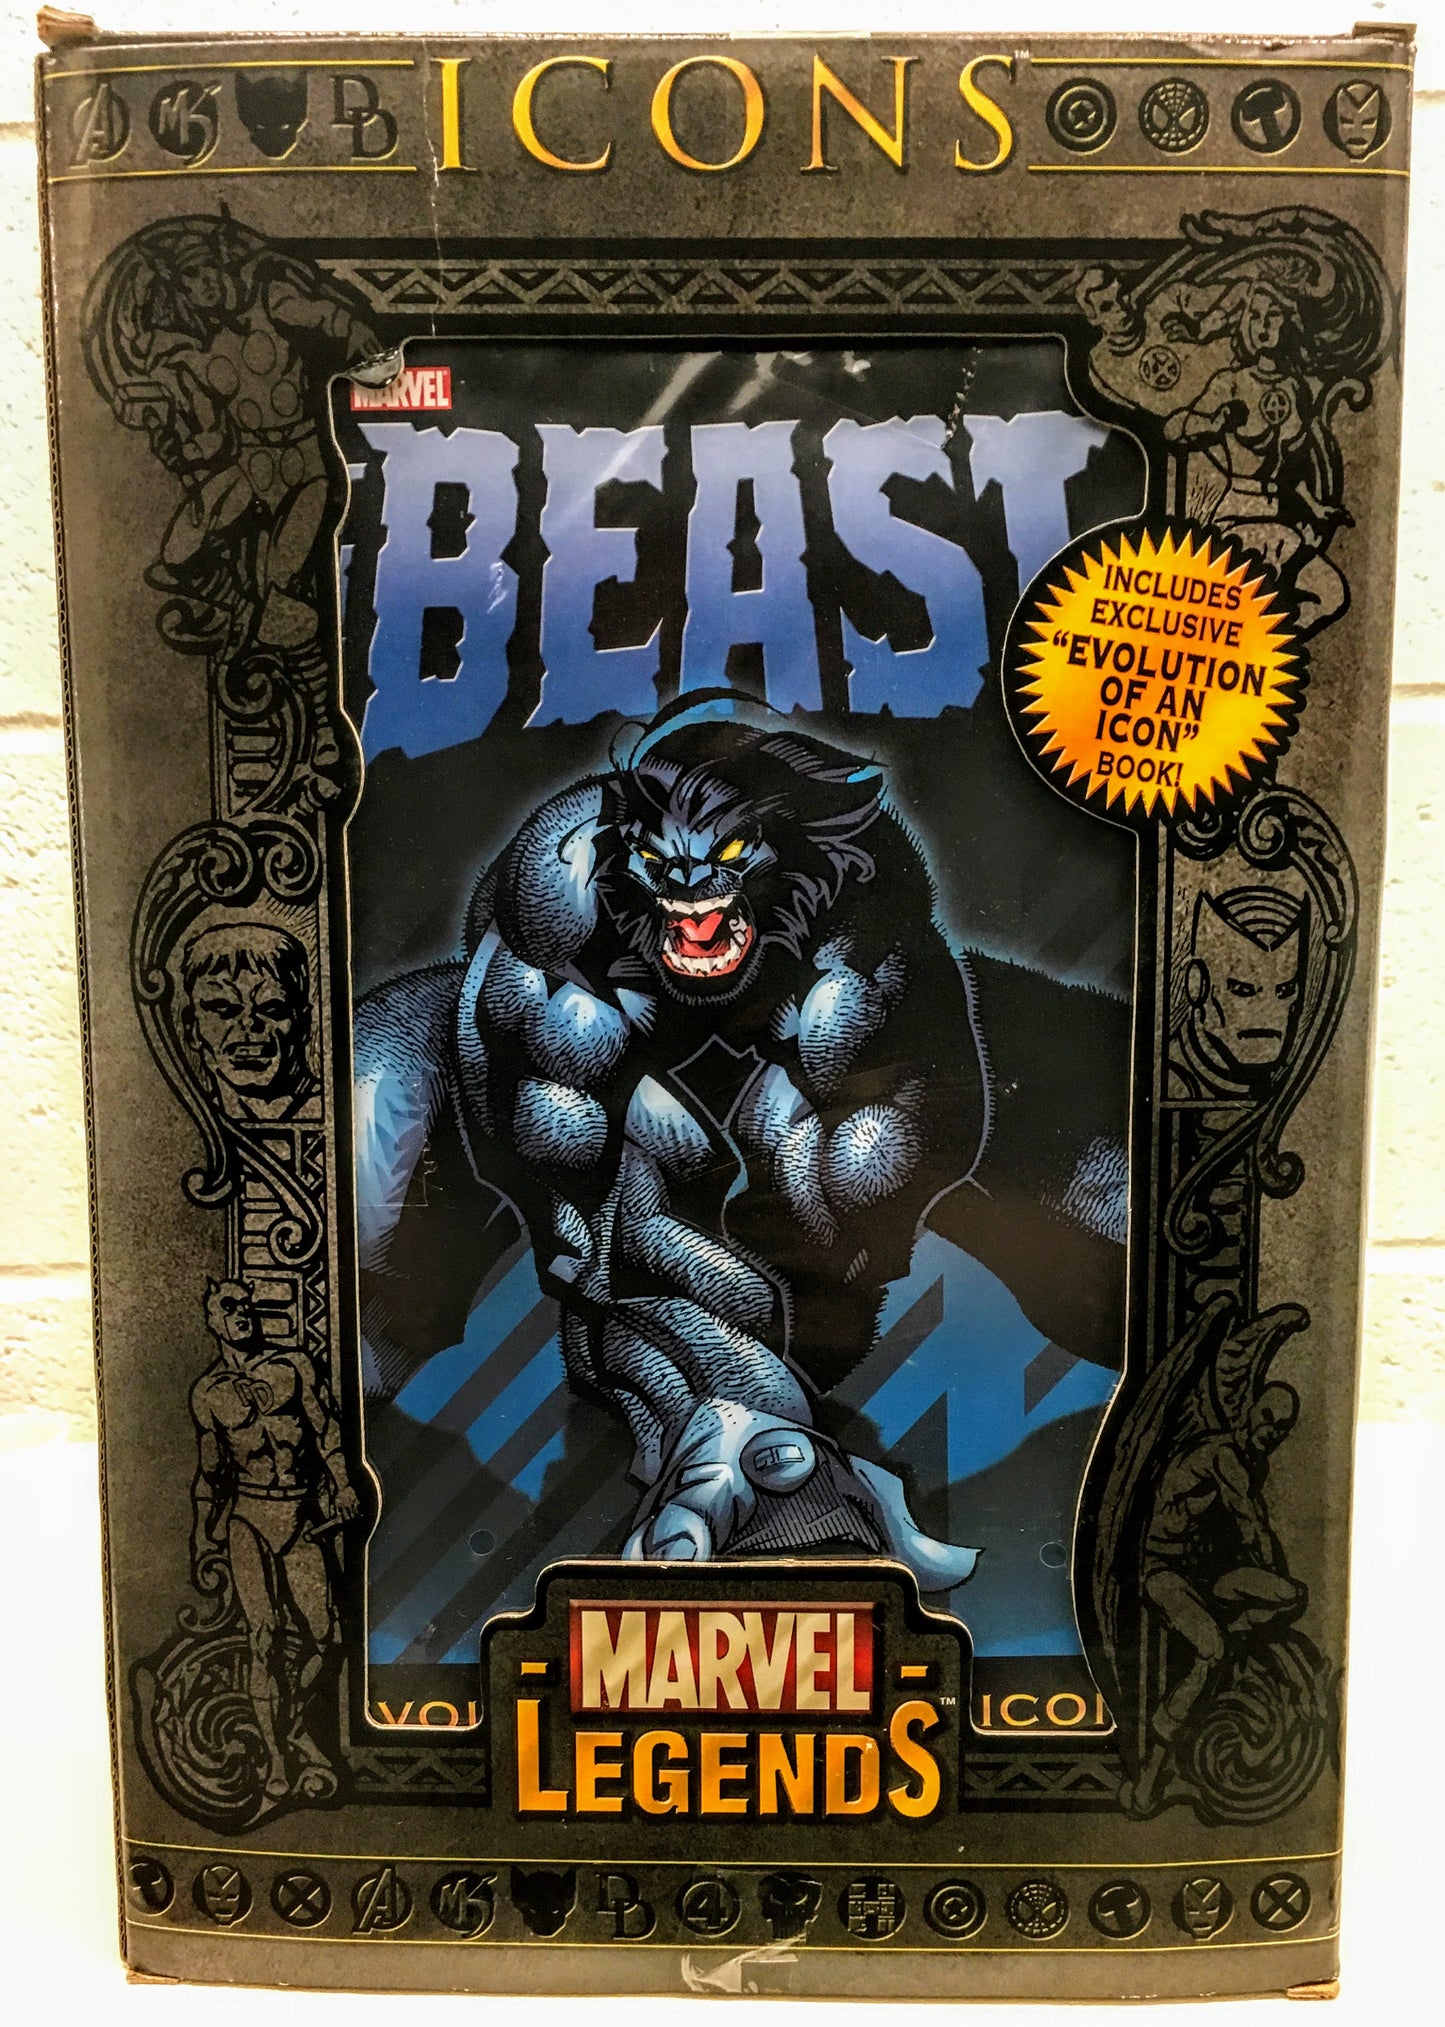 Marvel Legends Icons: The Beast